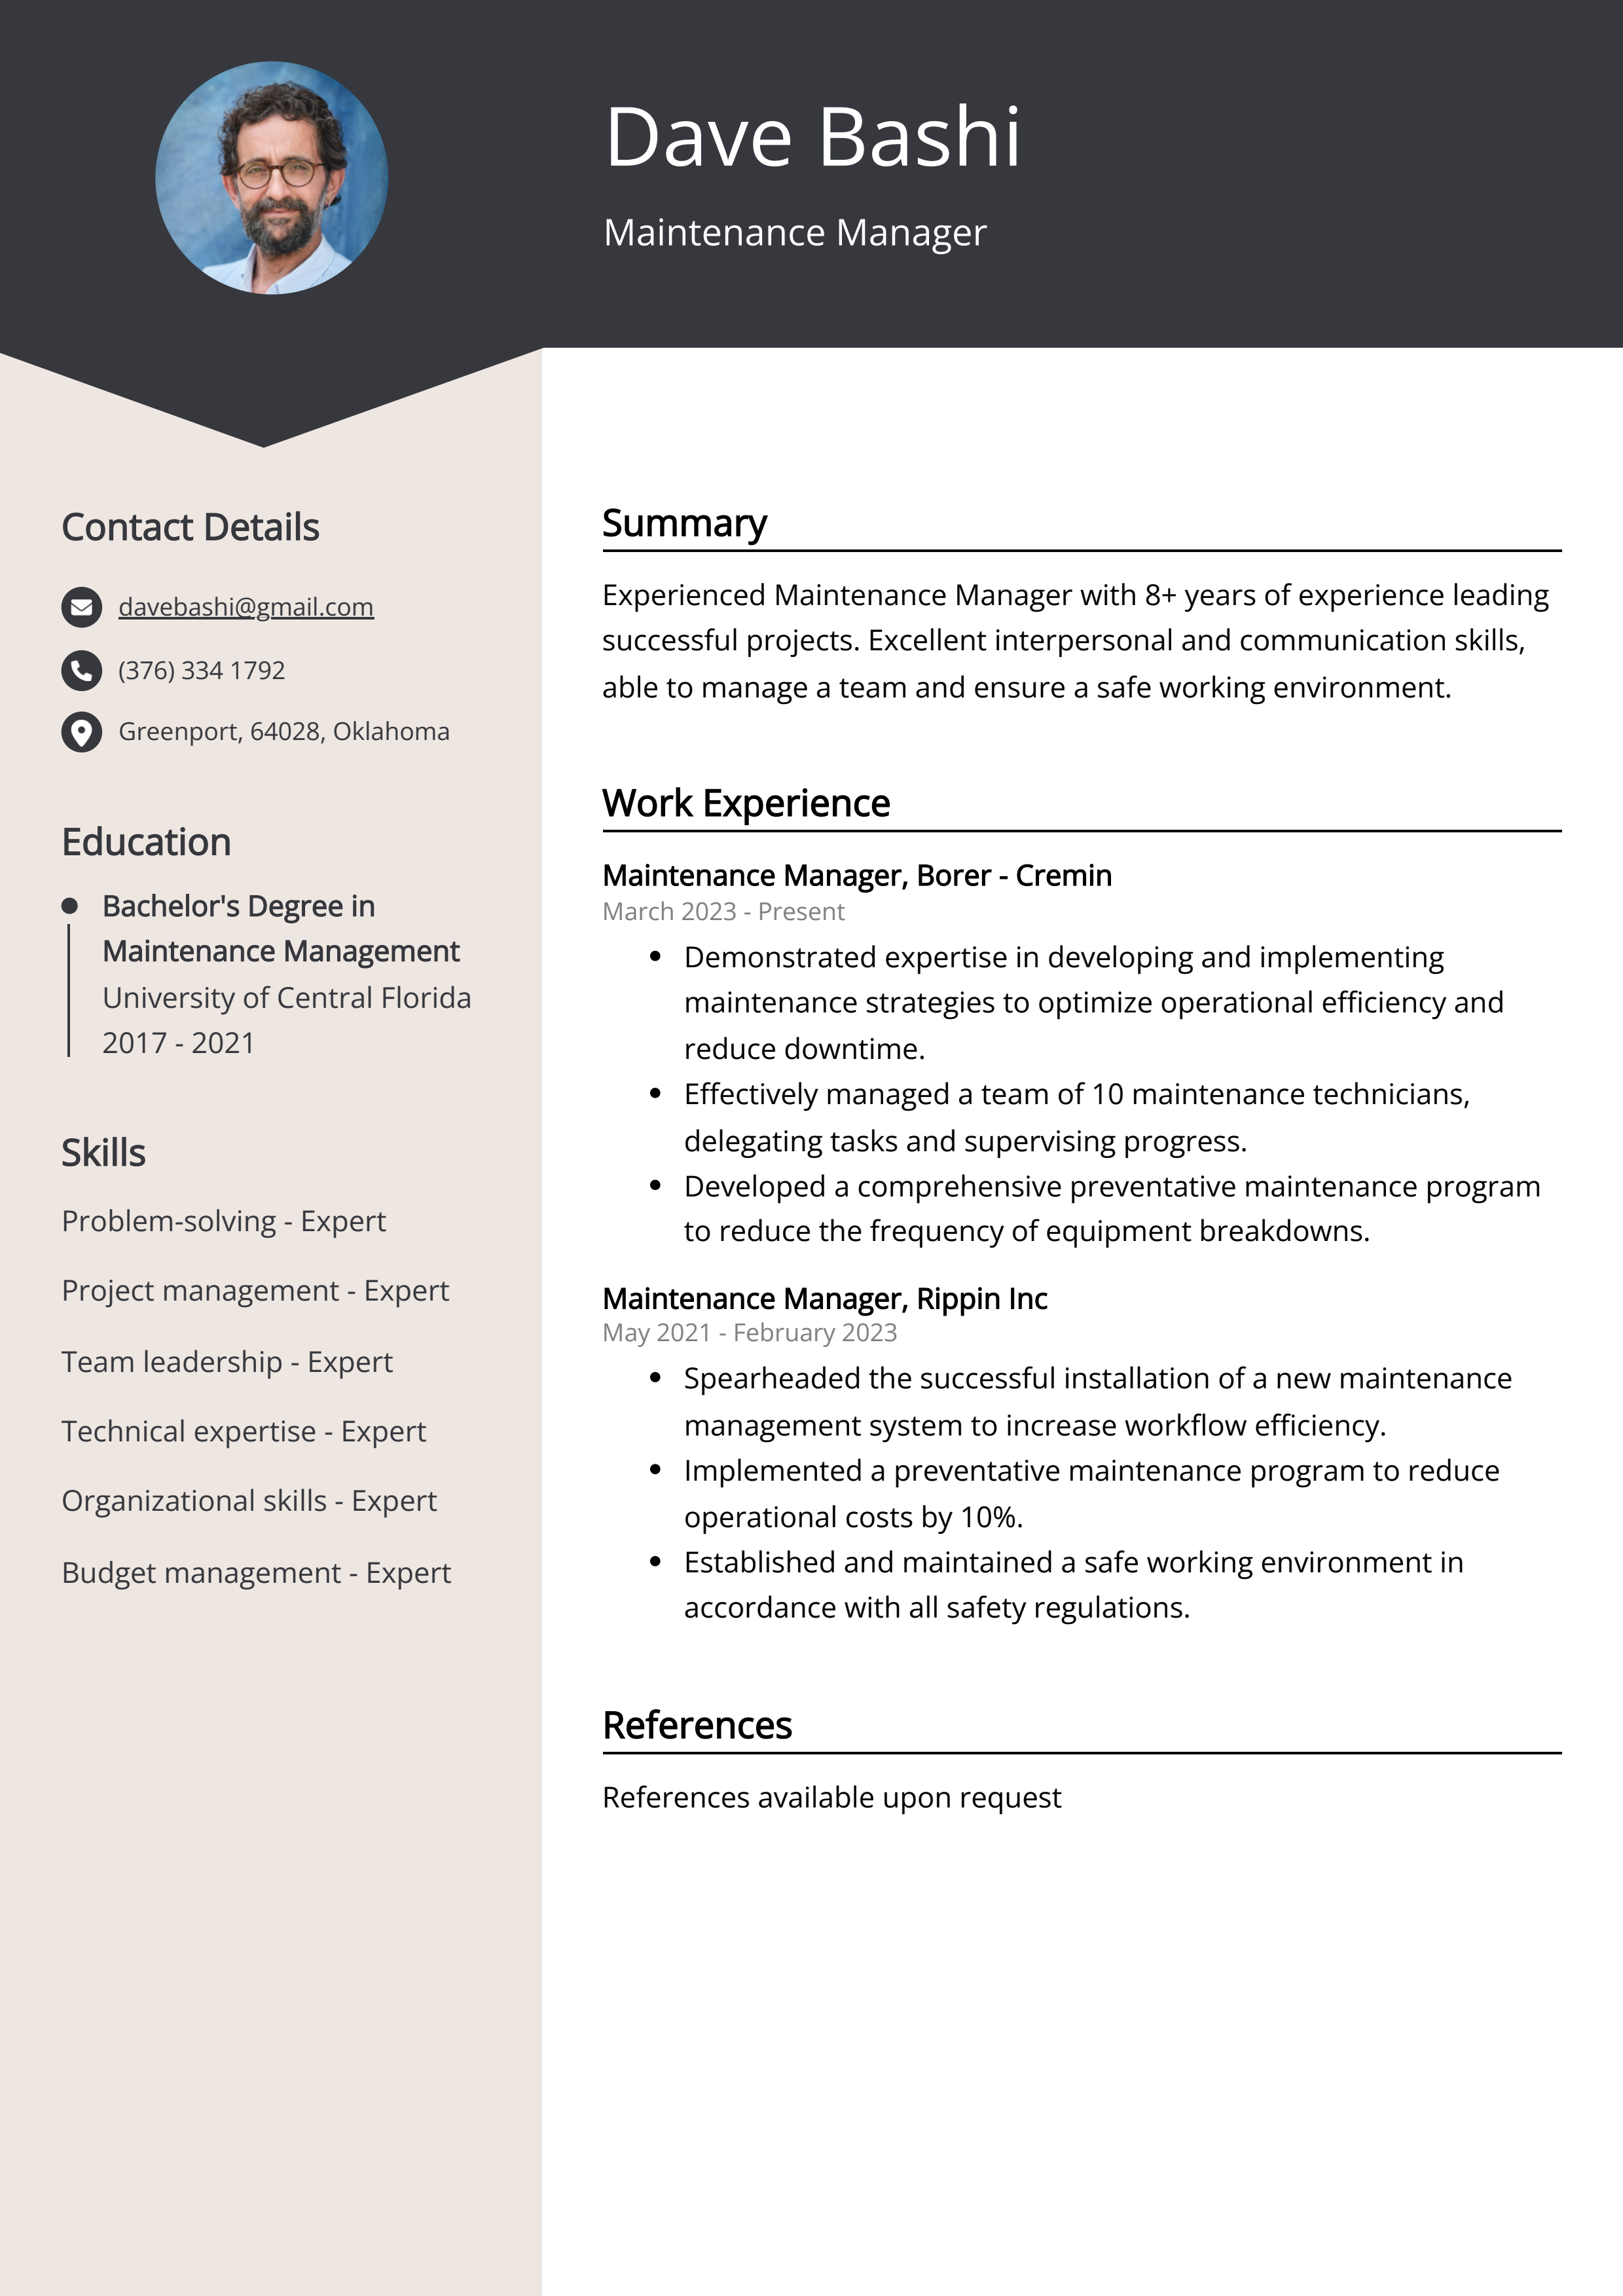 Maintenance Manager CV Example